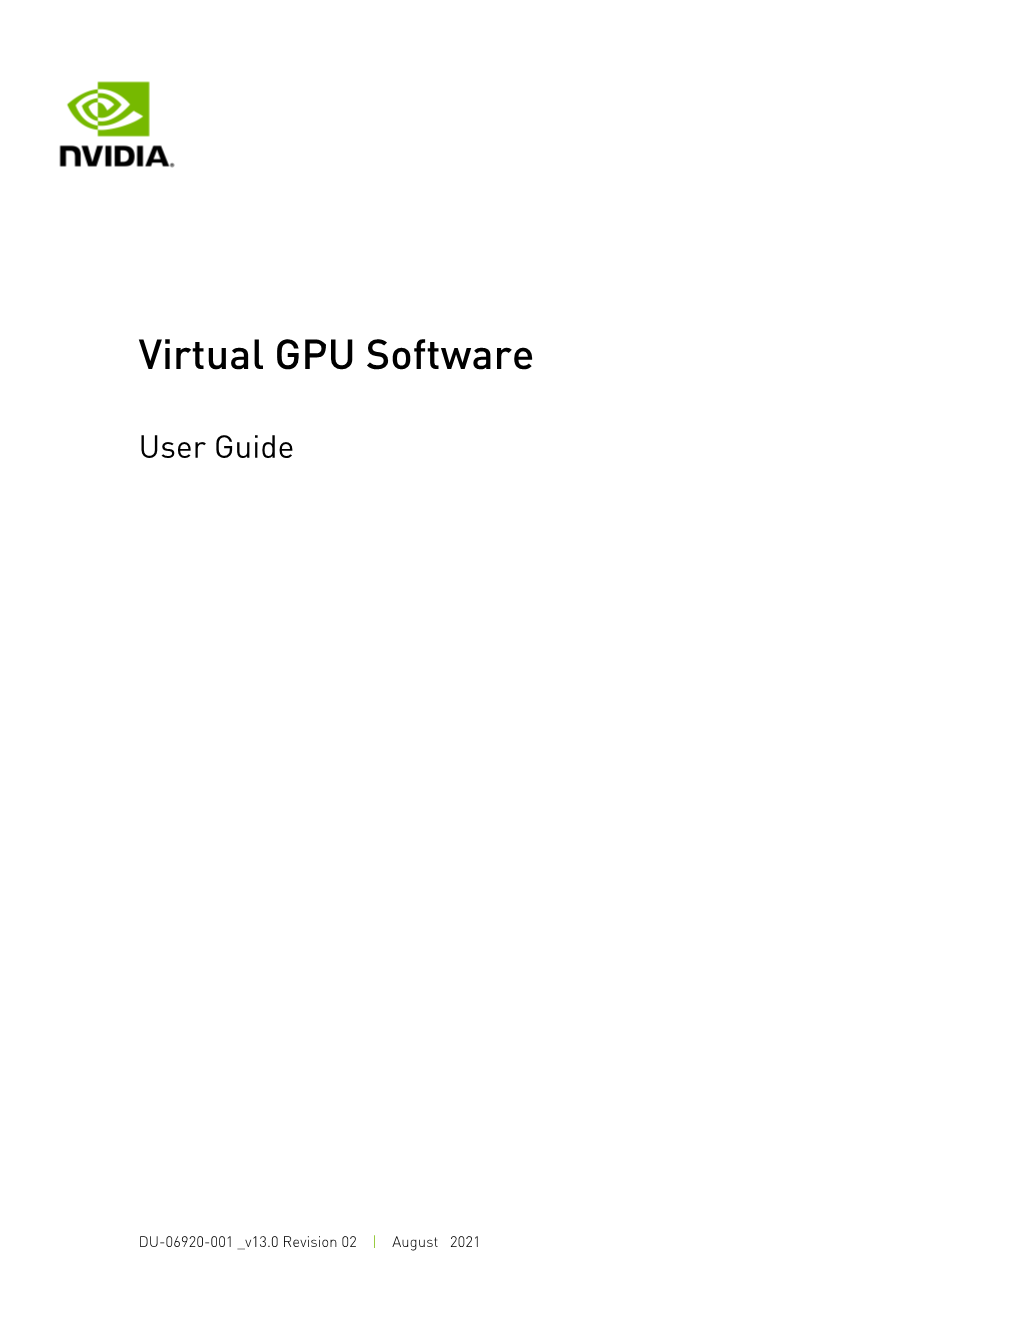 Virtual GPU Software User Guide Is Organized As Follows: ‣ This Chapter Introduces the Capabilities and Features of NVIDIA Vgpu Software